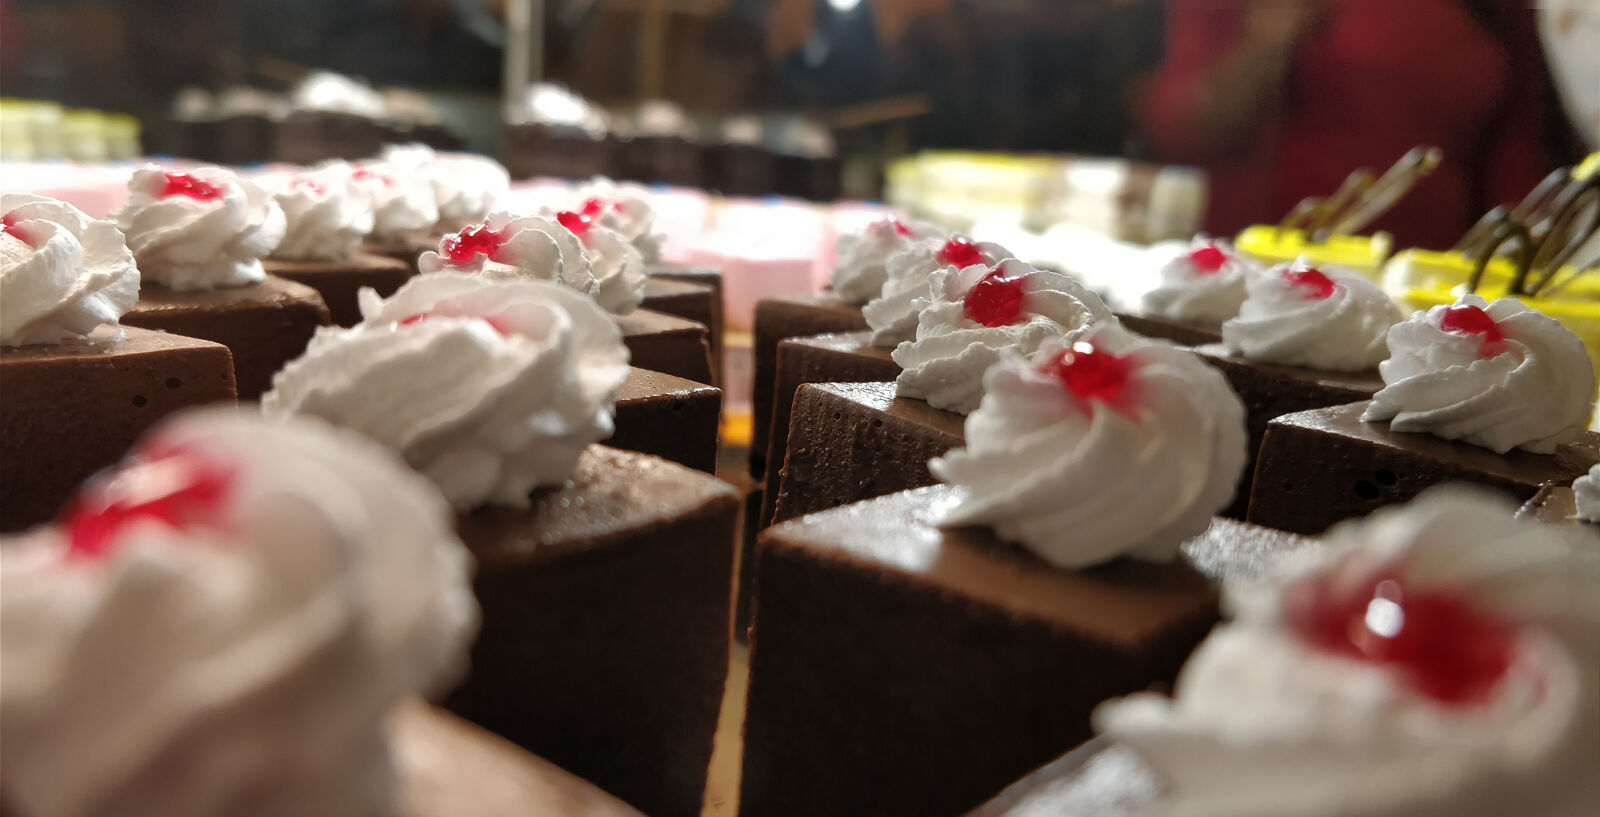 OnePlus 5 sample photo. Cakes, foodporn, yummy photography